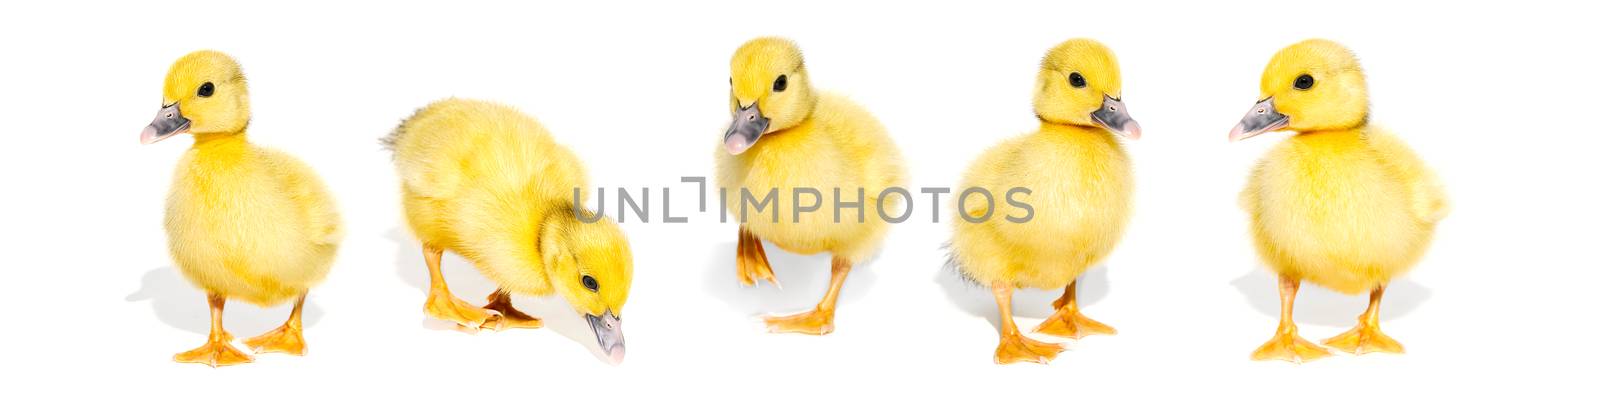 Collage of cute yellow ducklings isolated on a white background. Panorama of newborn baby ducks, can be used as banner. by PhotoTime